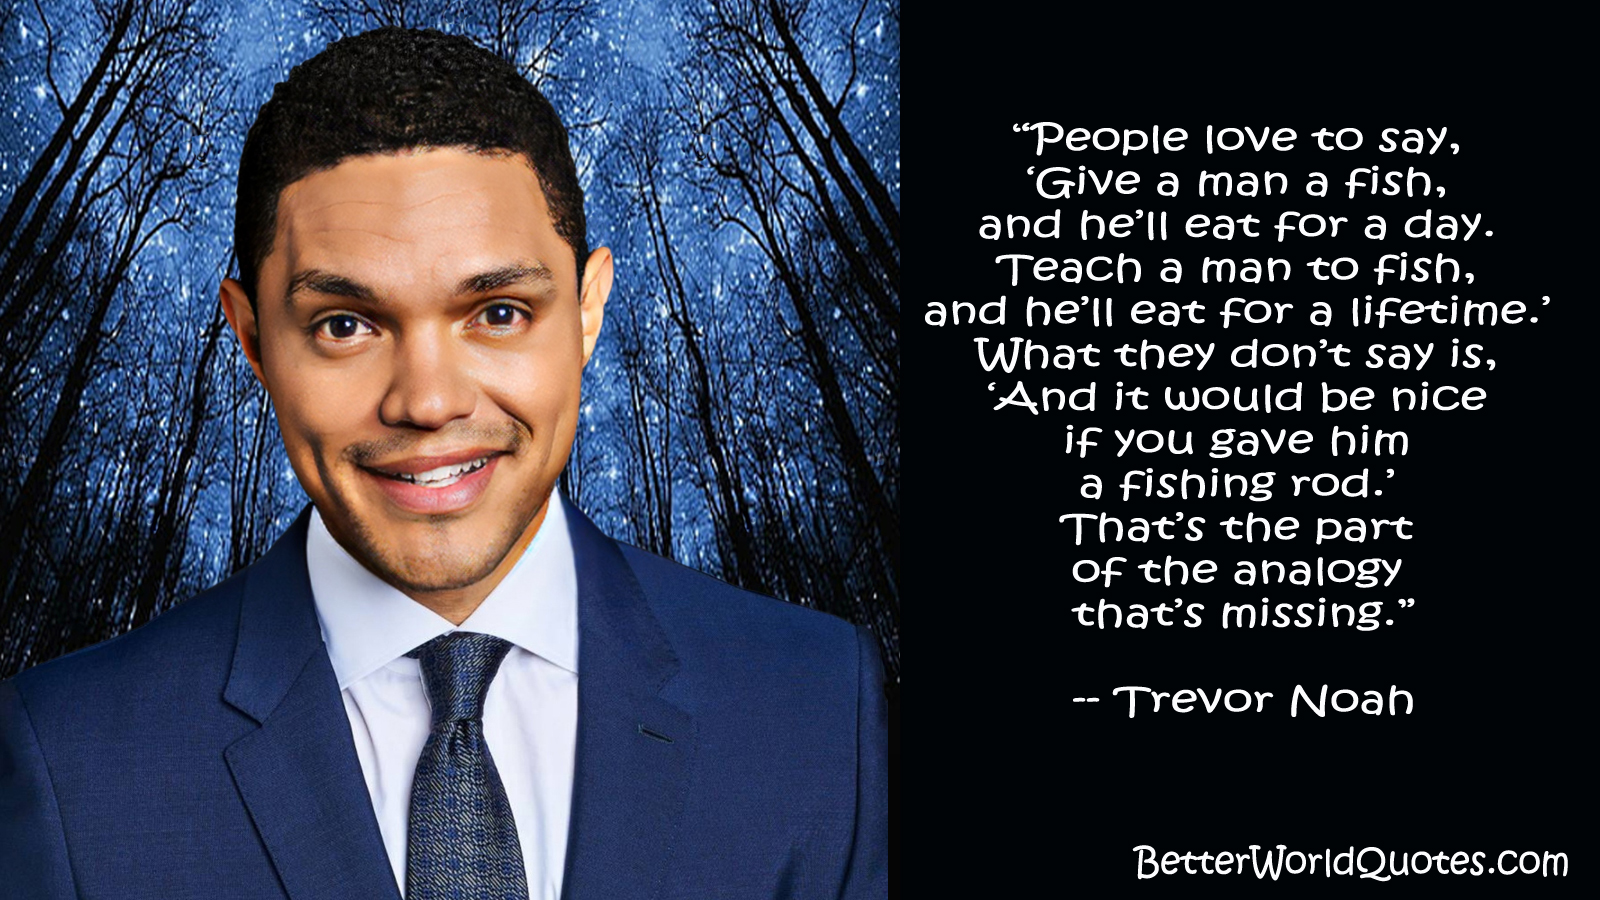 Trevor Noah: People love to say, Give a man a fish, and hell eat for a day. Teach a man to fish, and hell eat for a lifetime. What they dont say is, And it would be nice if you gave him a fishing rod. Thats the part of the analogy thats missing.